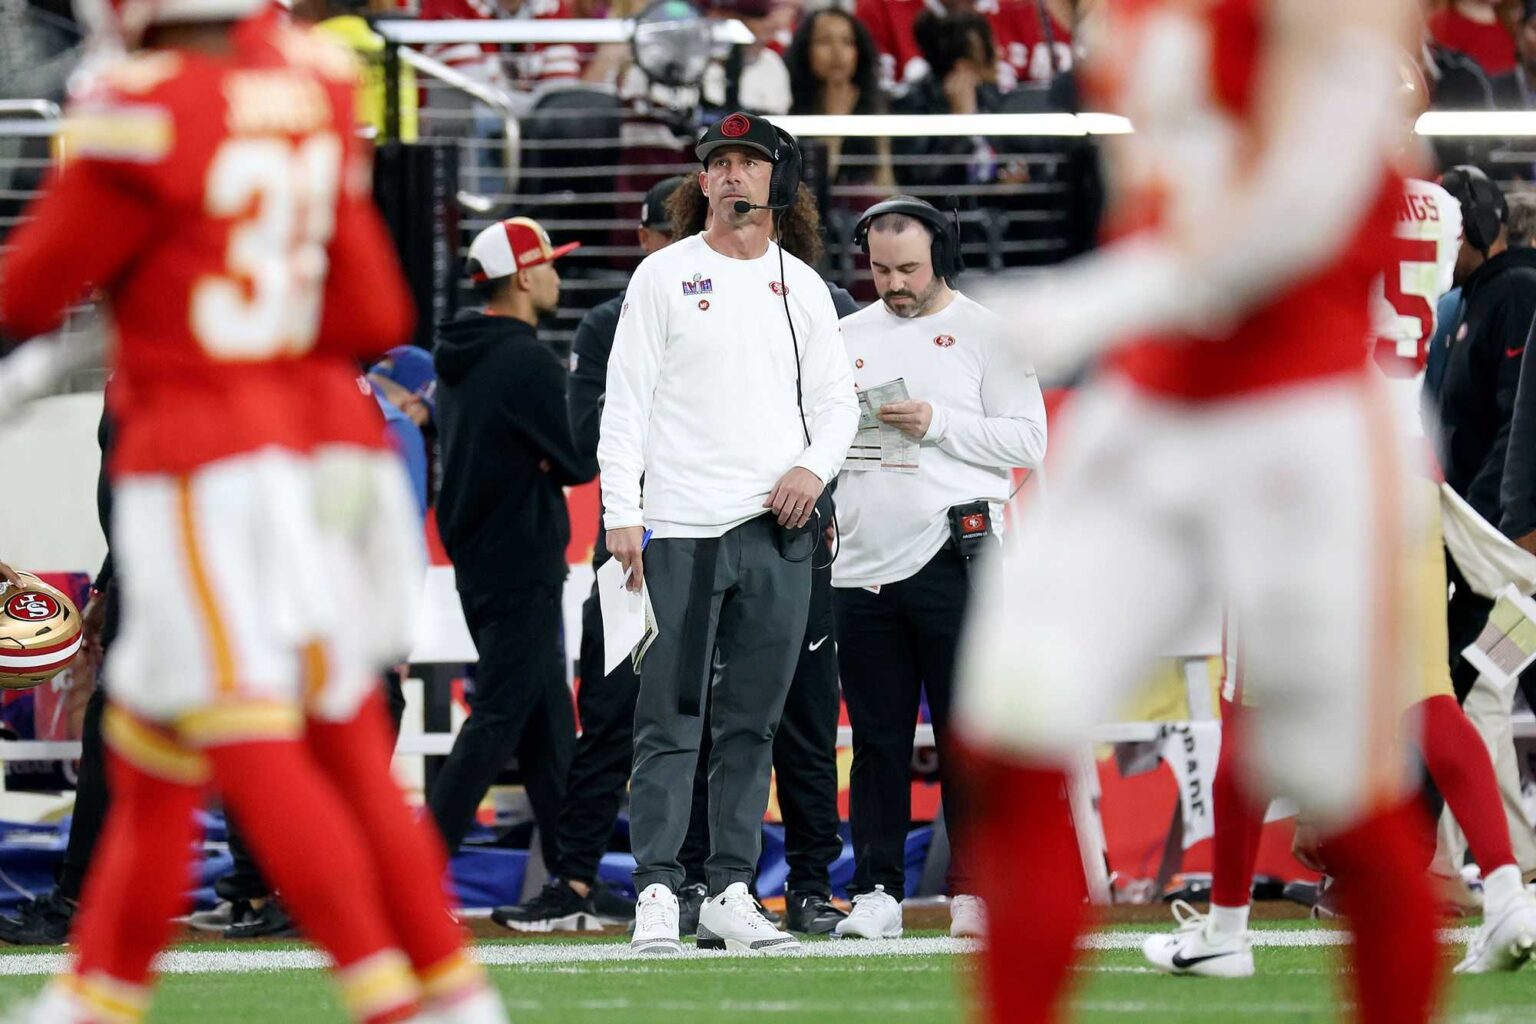 [WBALTV] 49ers players admit they didn’t know new Super Bowl overtime